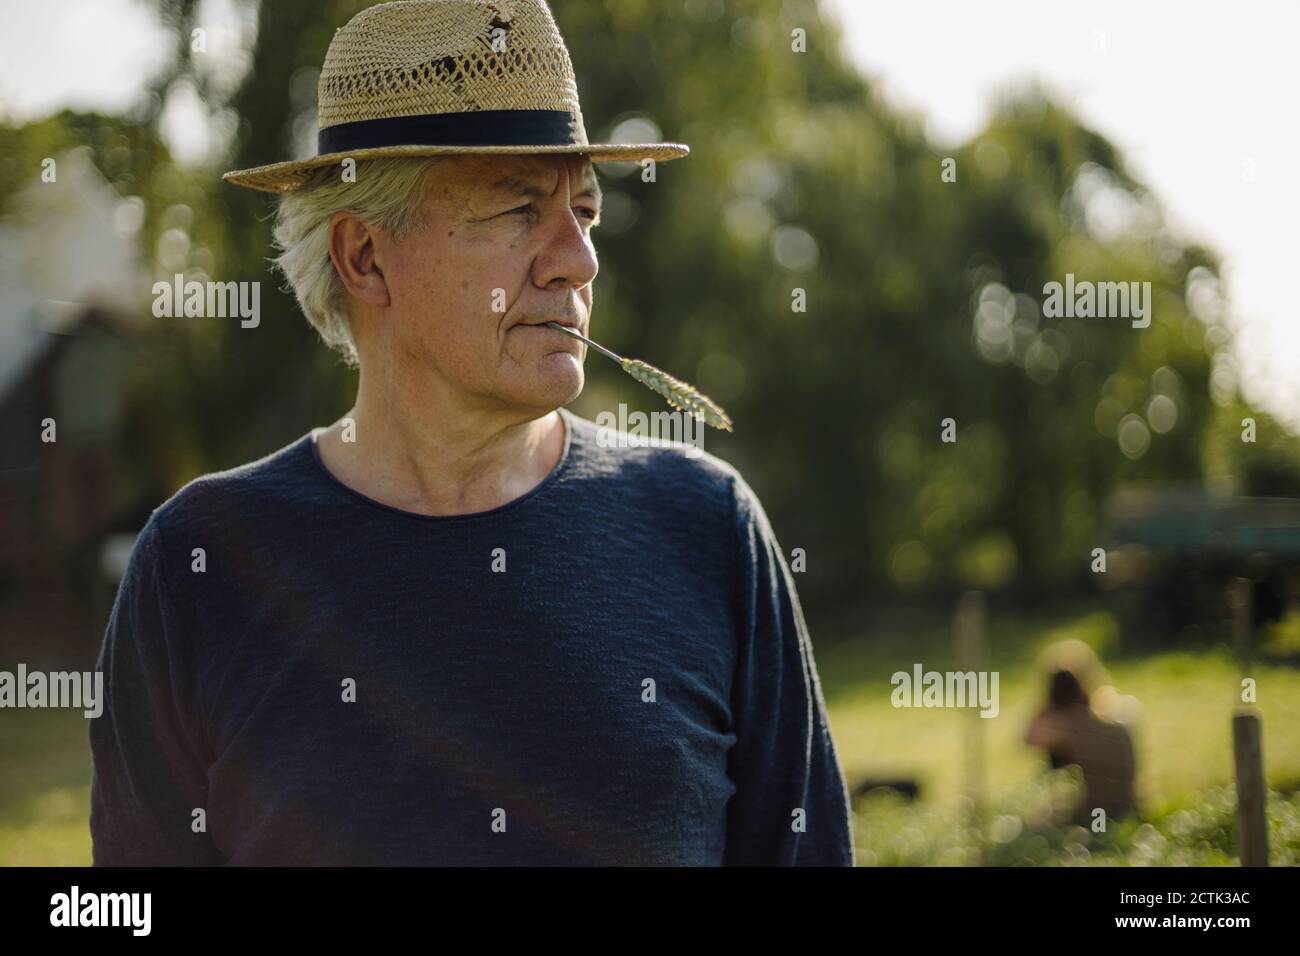 Wrinkled man holding crop in mouth while looking away in field Stock Photo